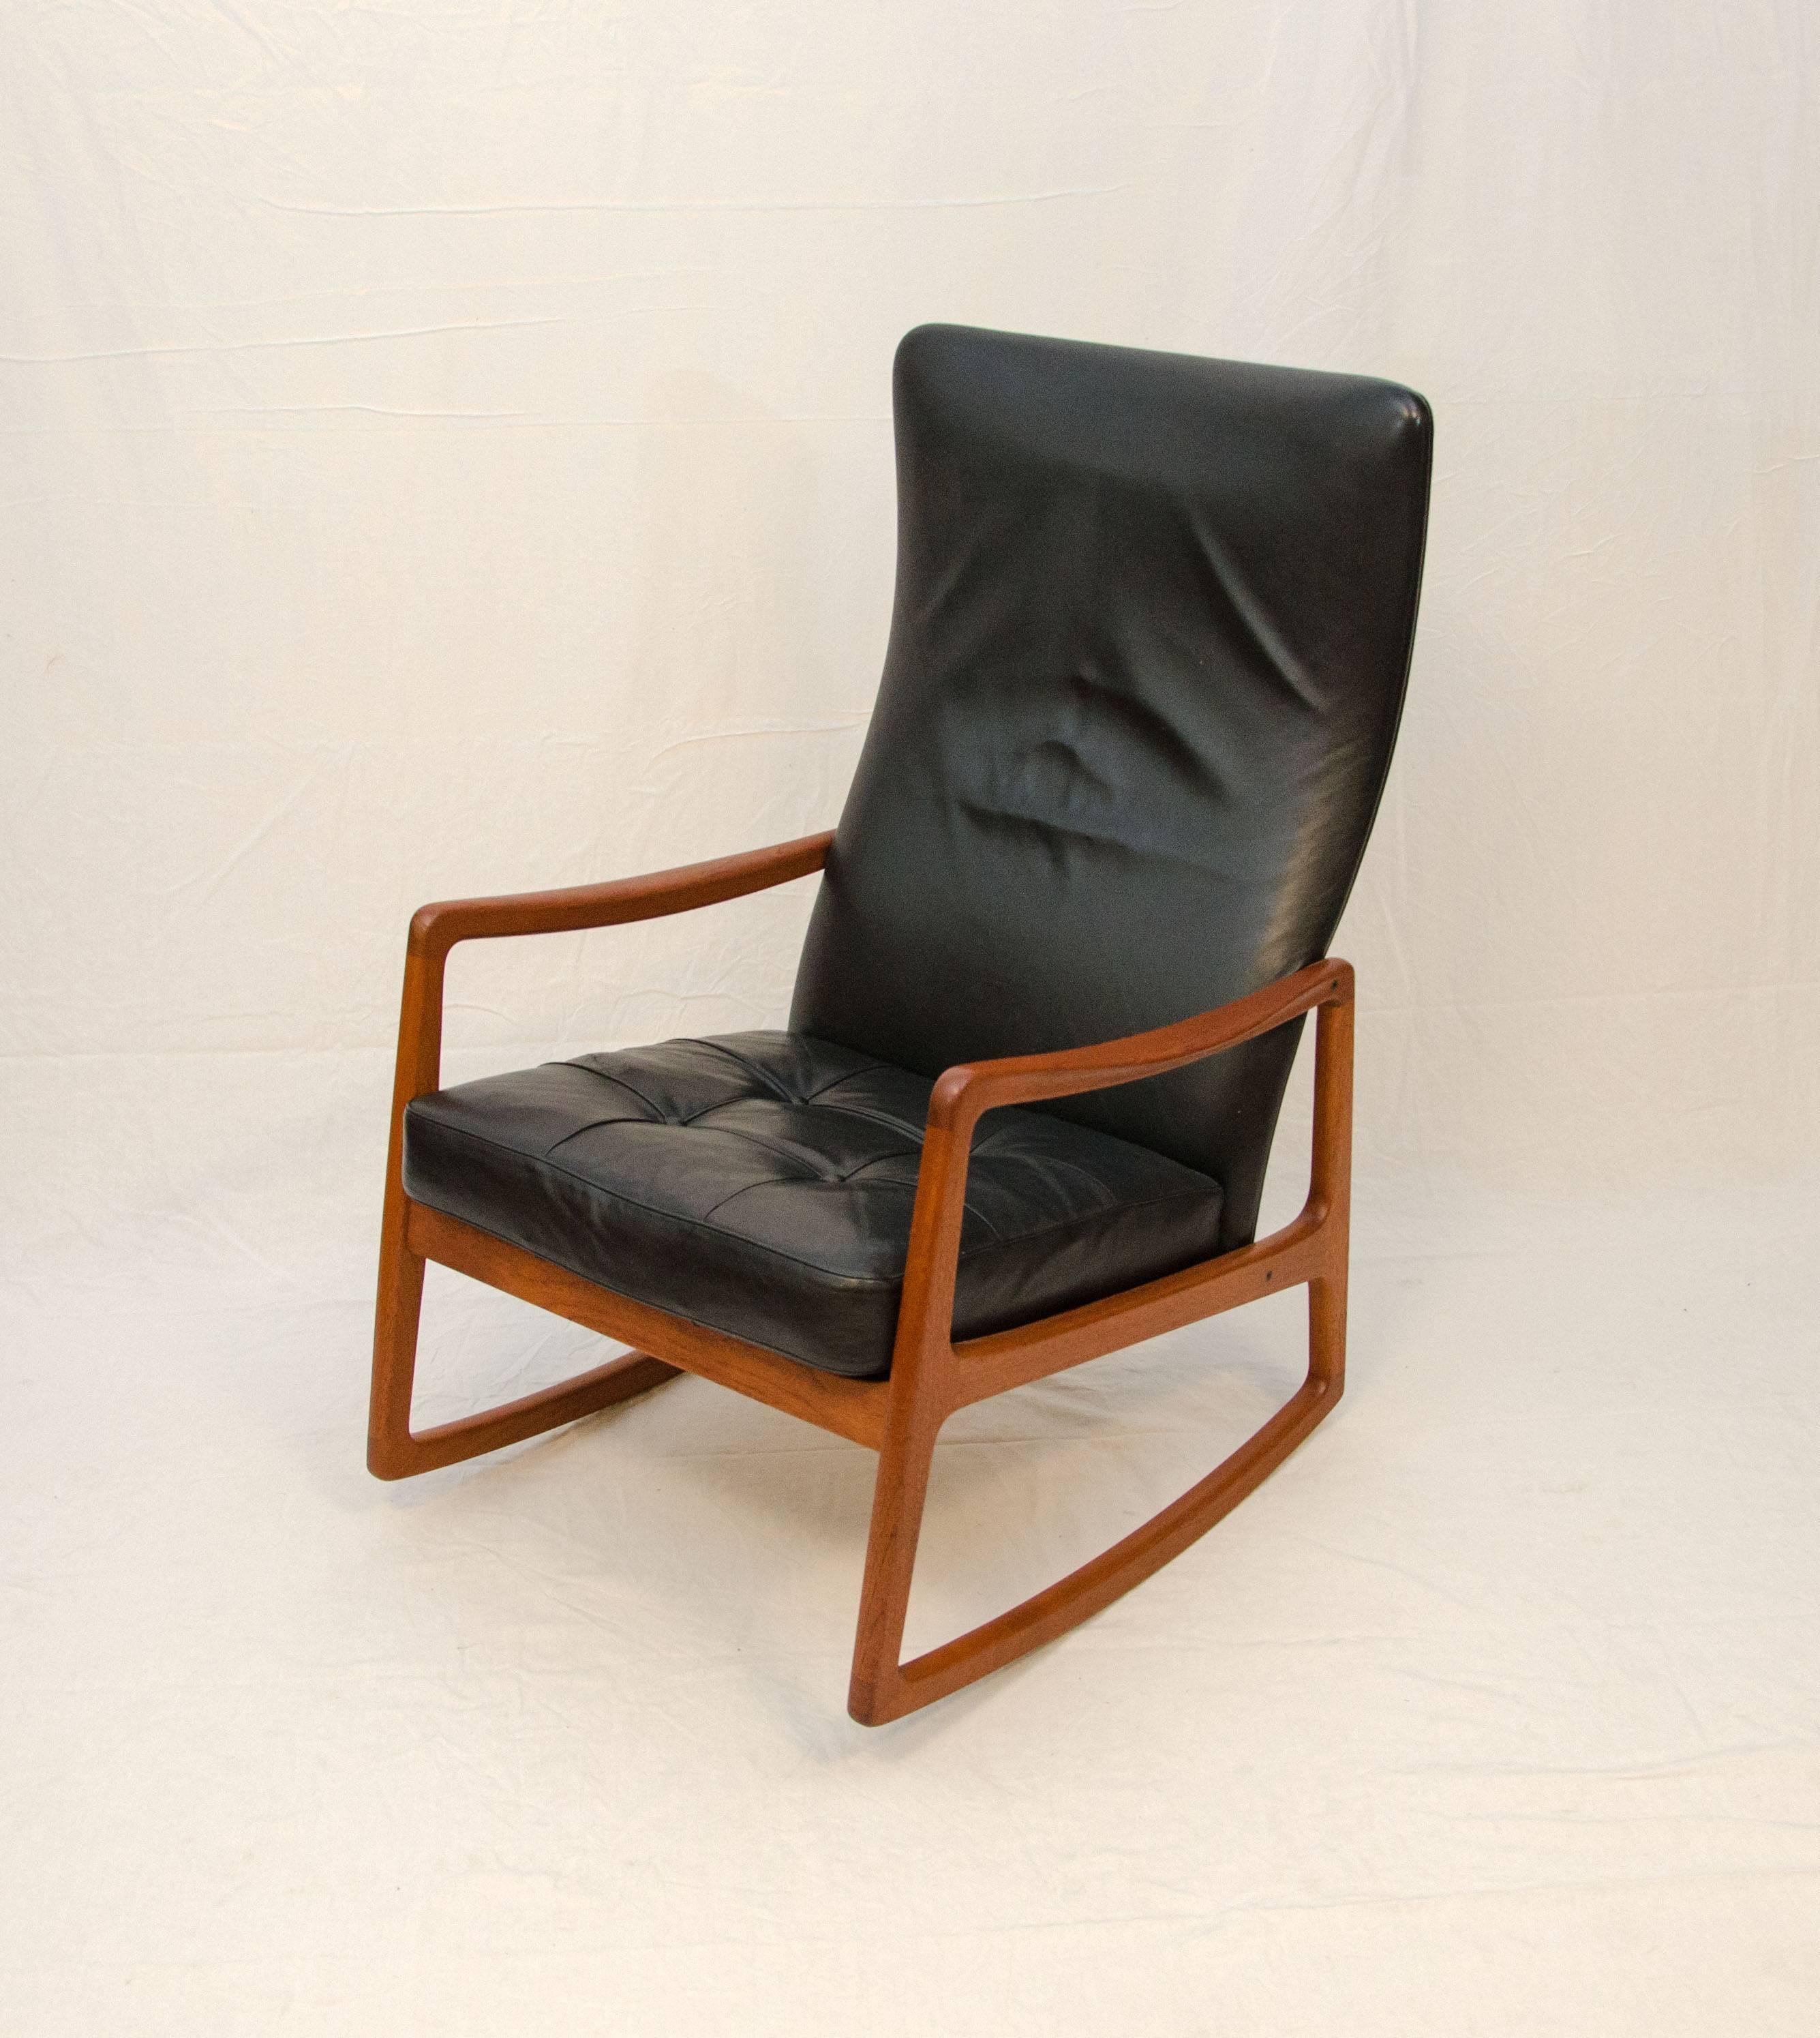 20th Century Danish Teak and Leather High Back Rocking Chair by Ole Wanscher For Sale